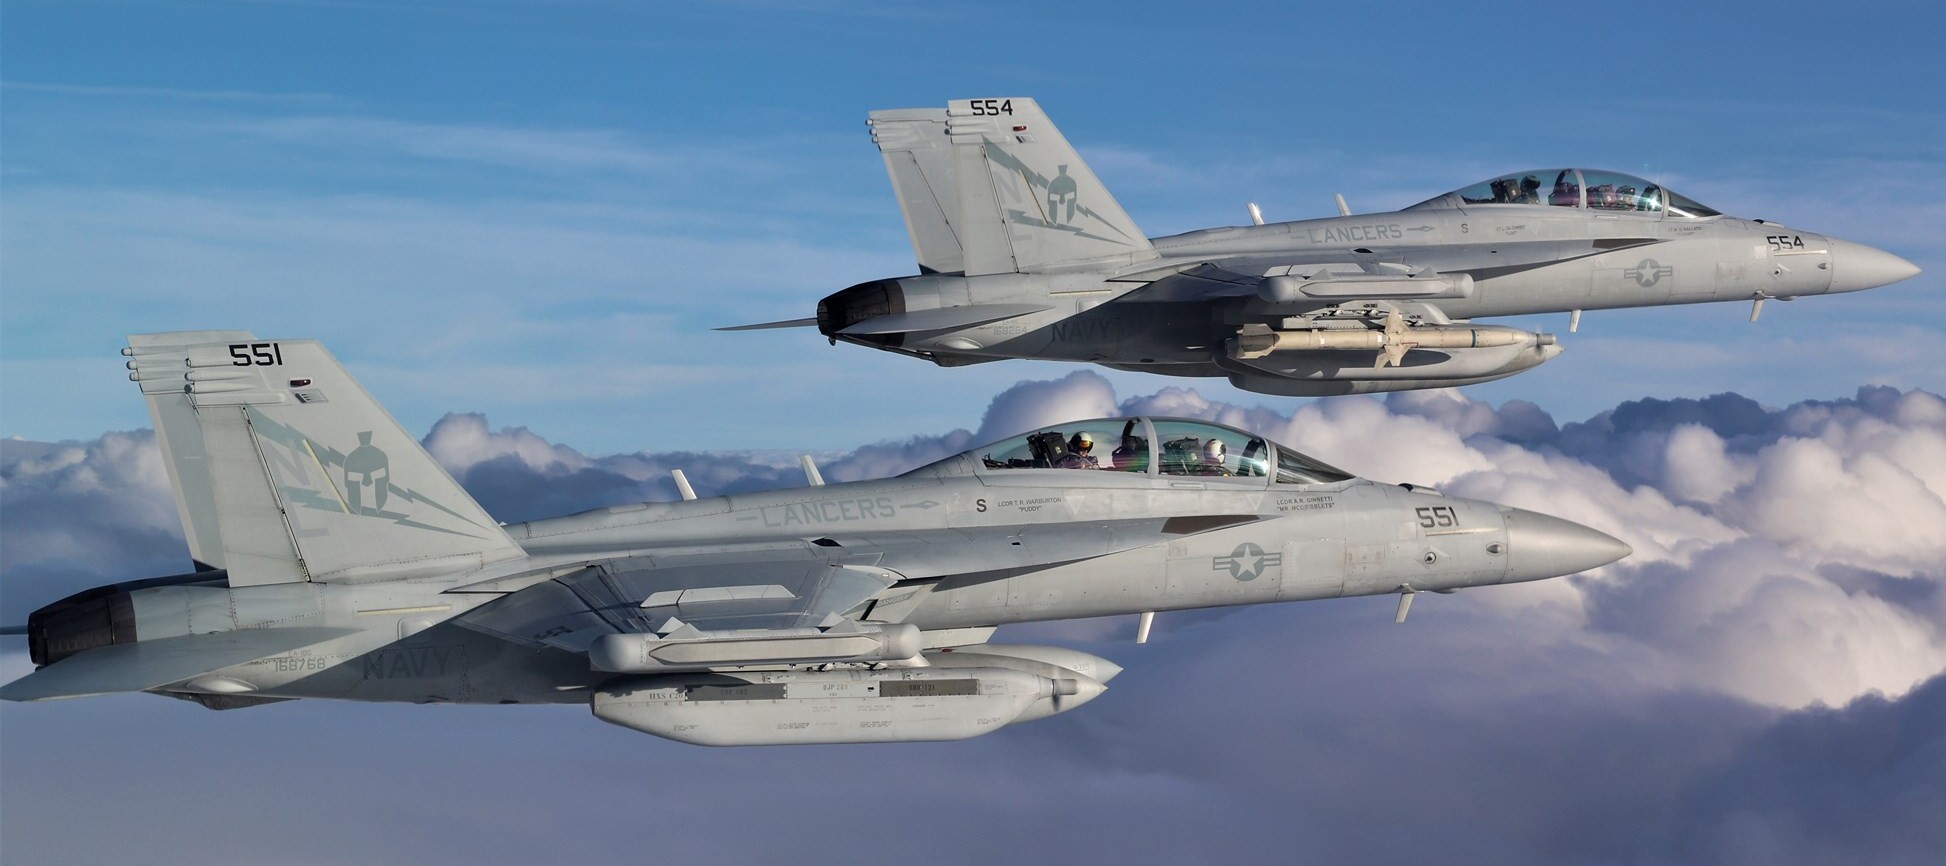 vaq-131 lancers electronic attack squadron vaqron us navy boeing ea-18g growler nas whidbey island cvw cvn uss 23x